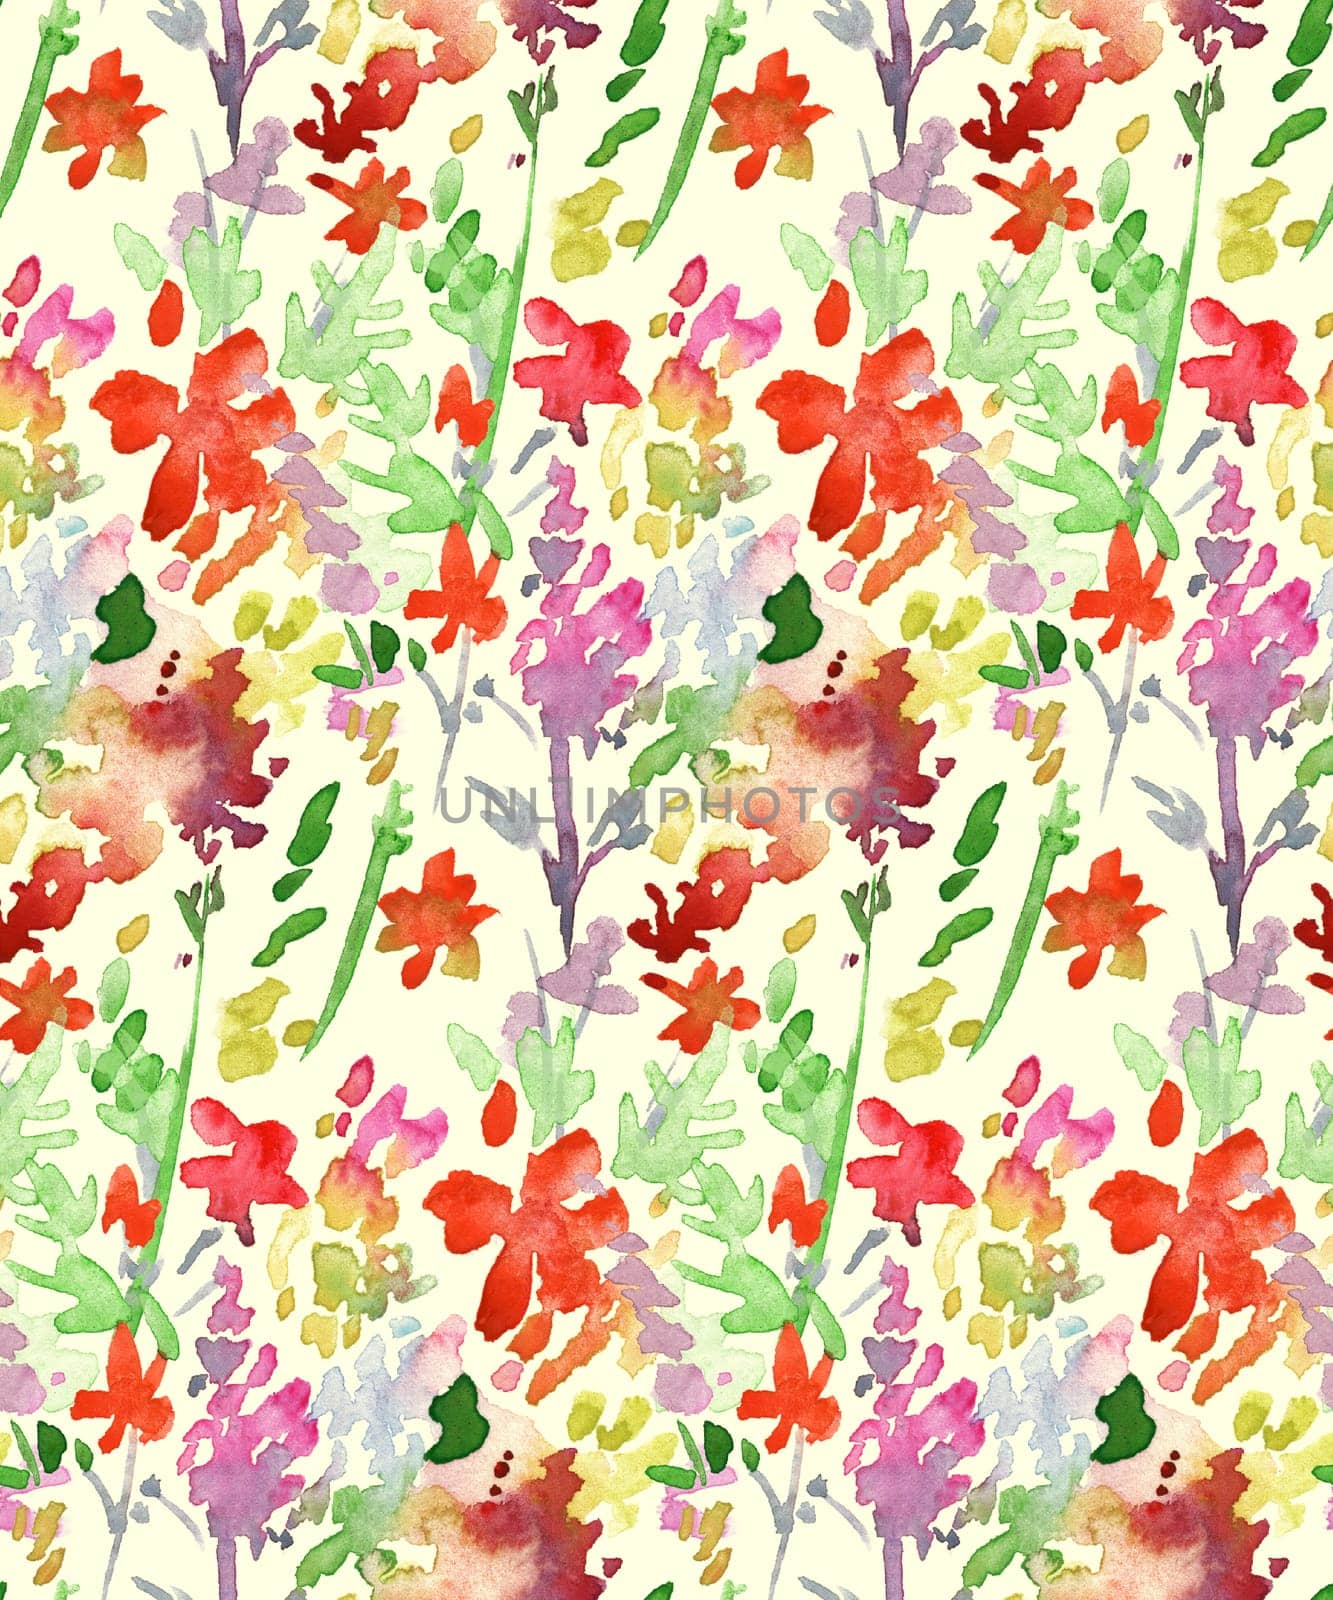 floral multicolored summer pattern with wildflowers and plants by MarinaVoyush